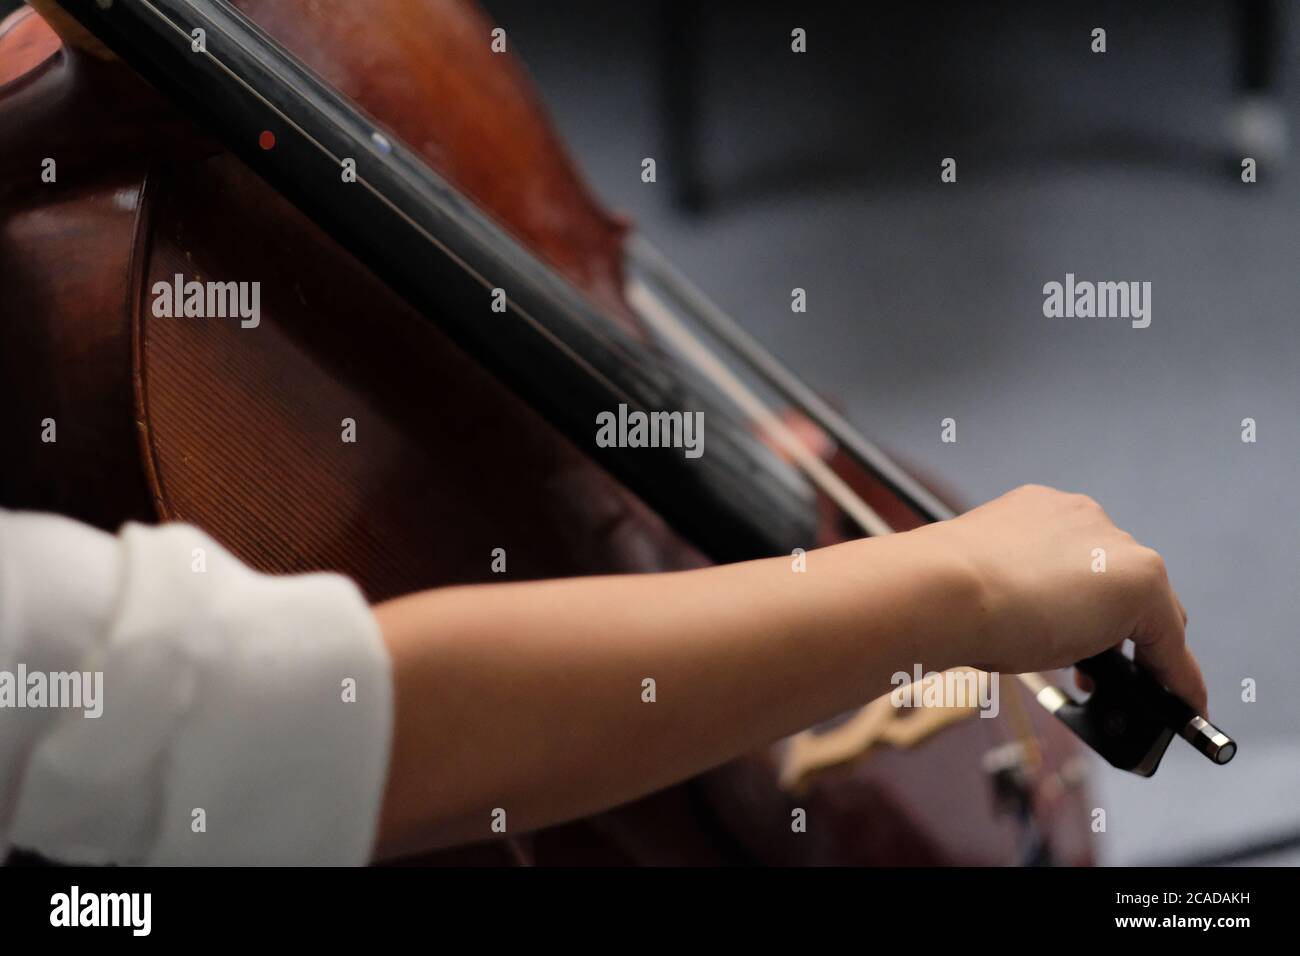 Close up female musician's arm taking a bow, playing brown cello. Blur background Stock Photo